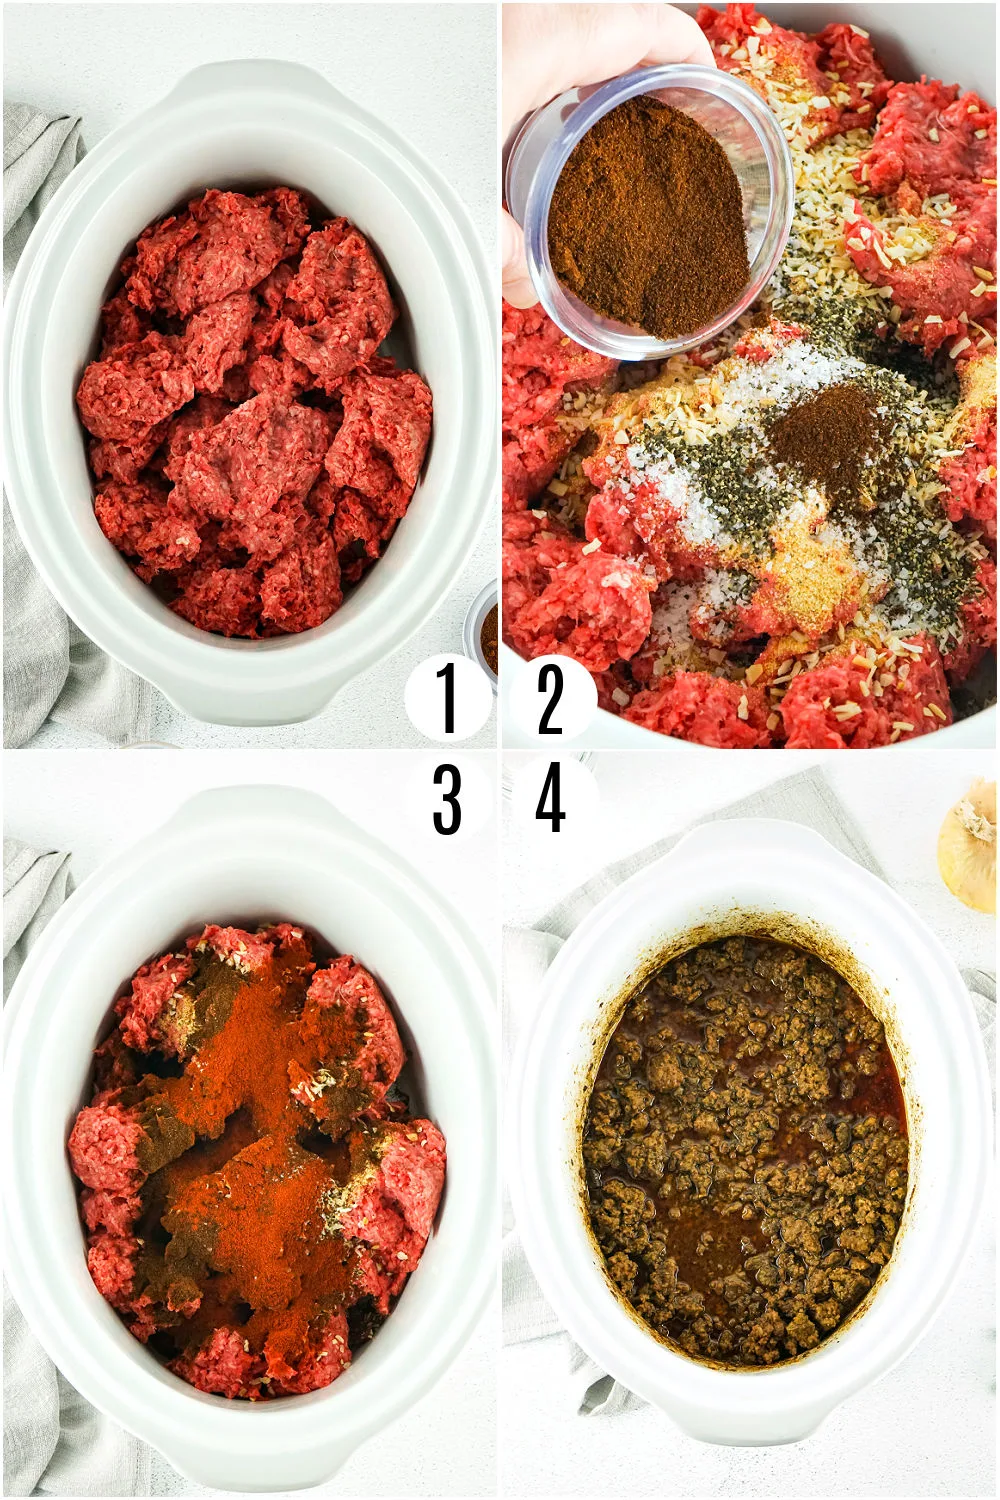 Step by step photos showing how to make taco meat in a slow cooker.